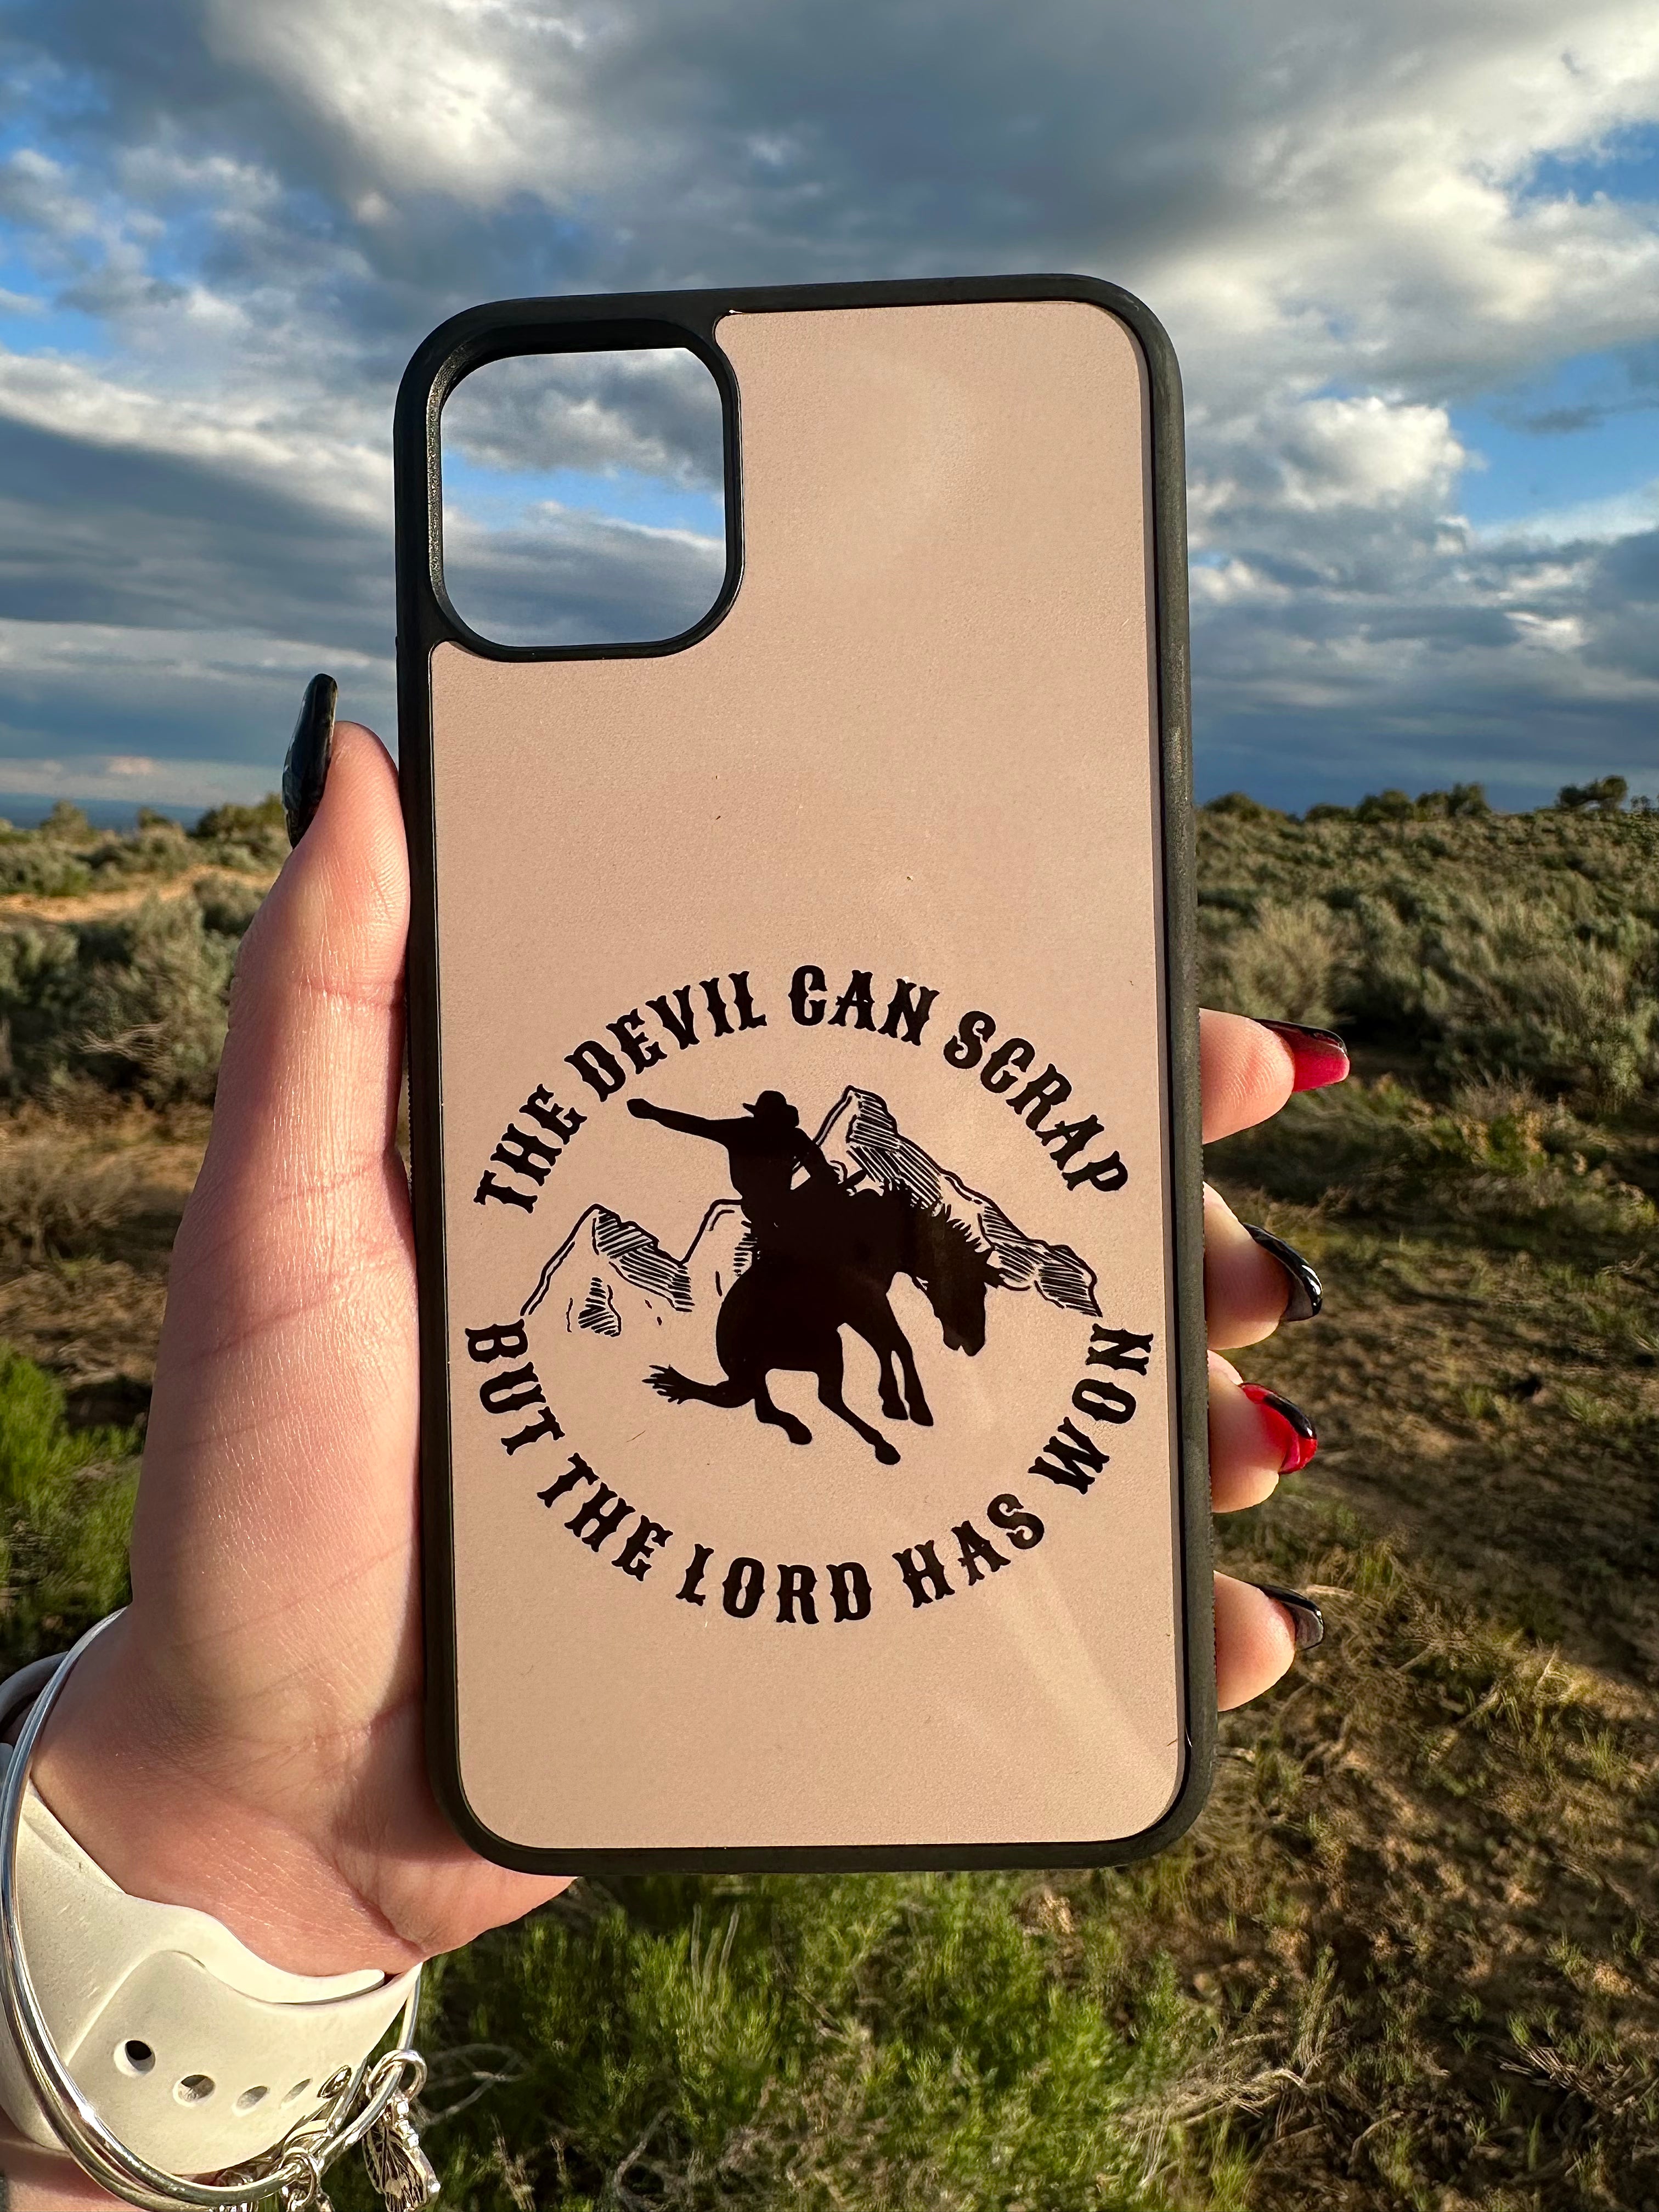 The devil can scrap but the lord has won phone case – twistednturquoise